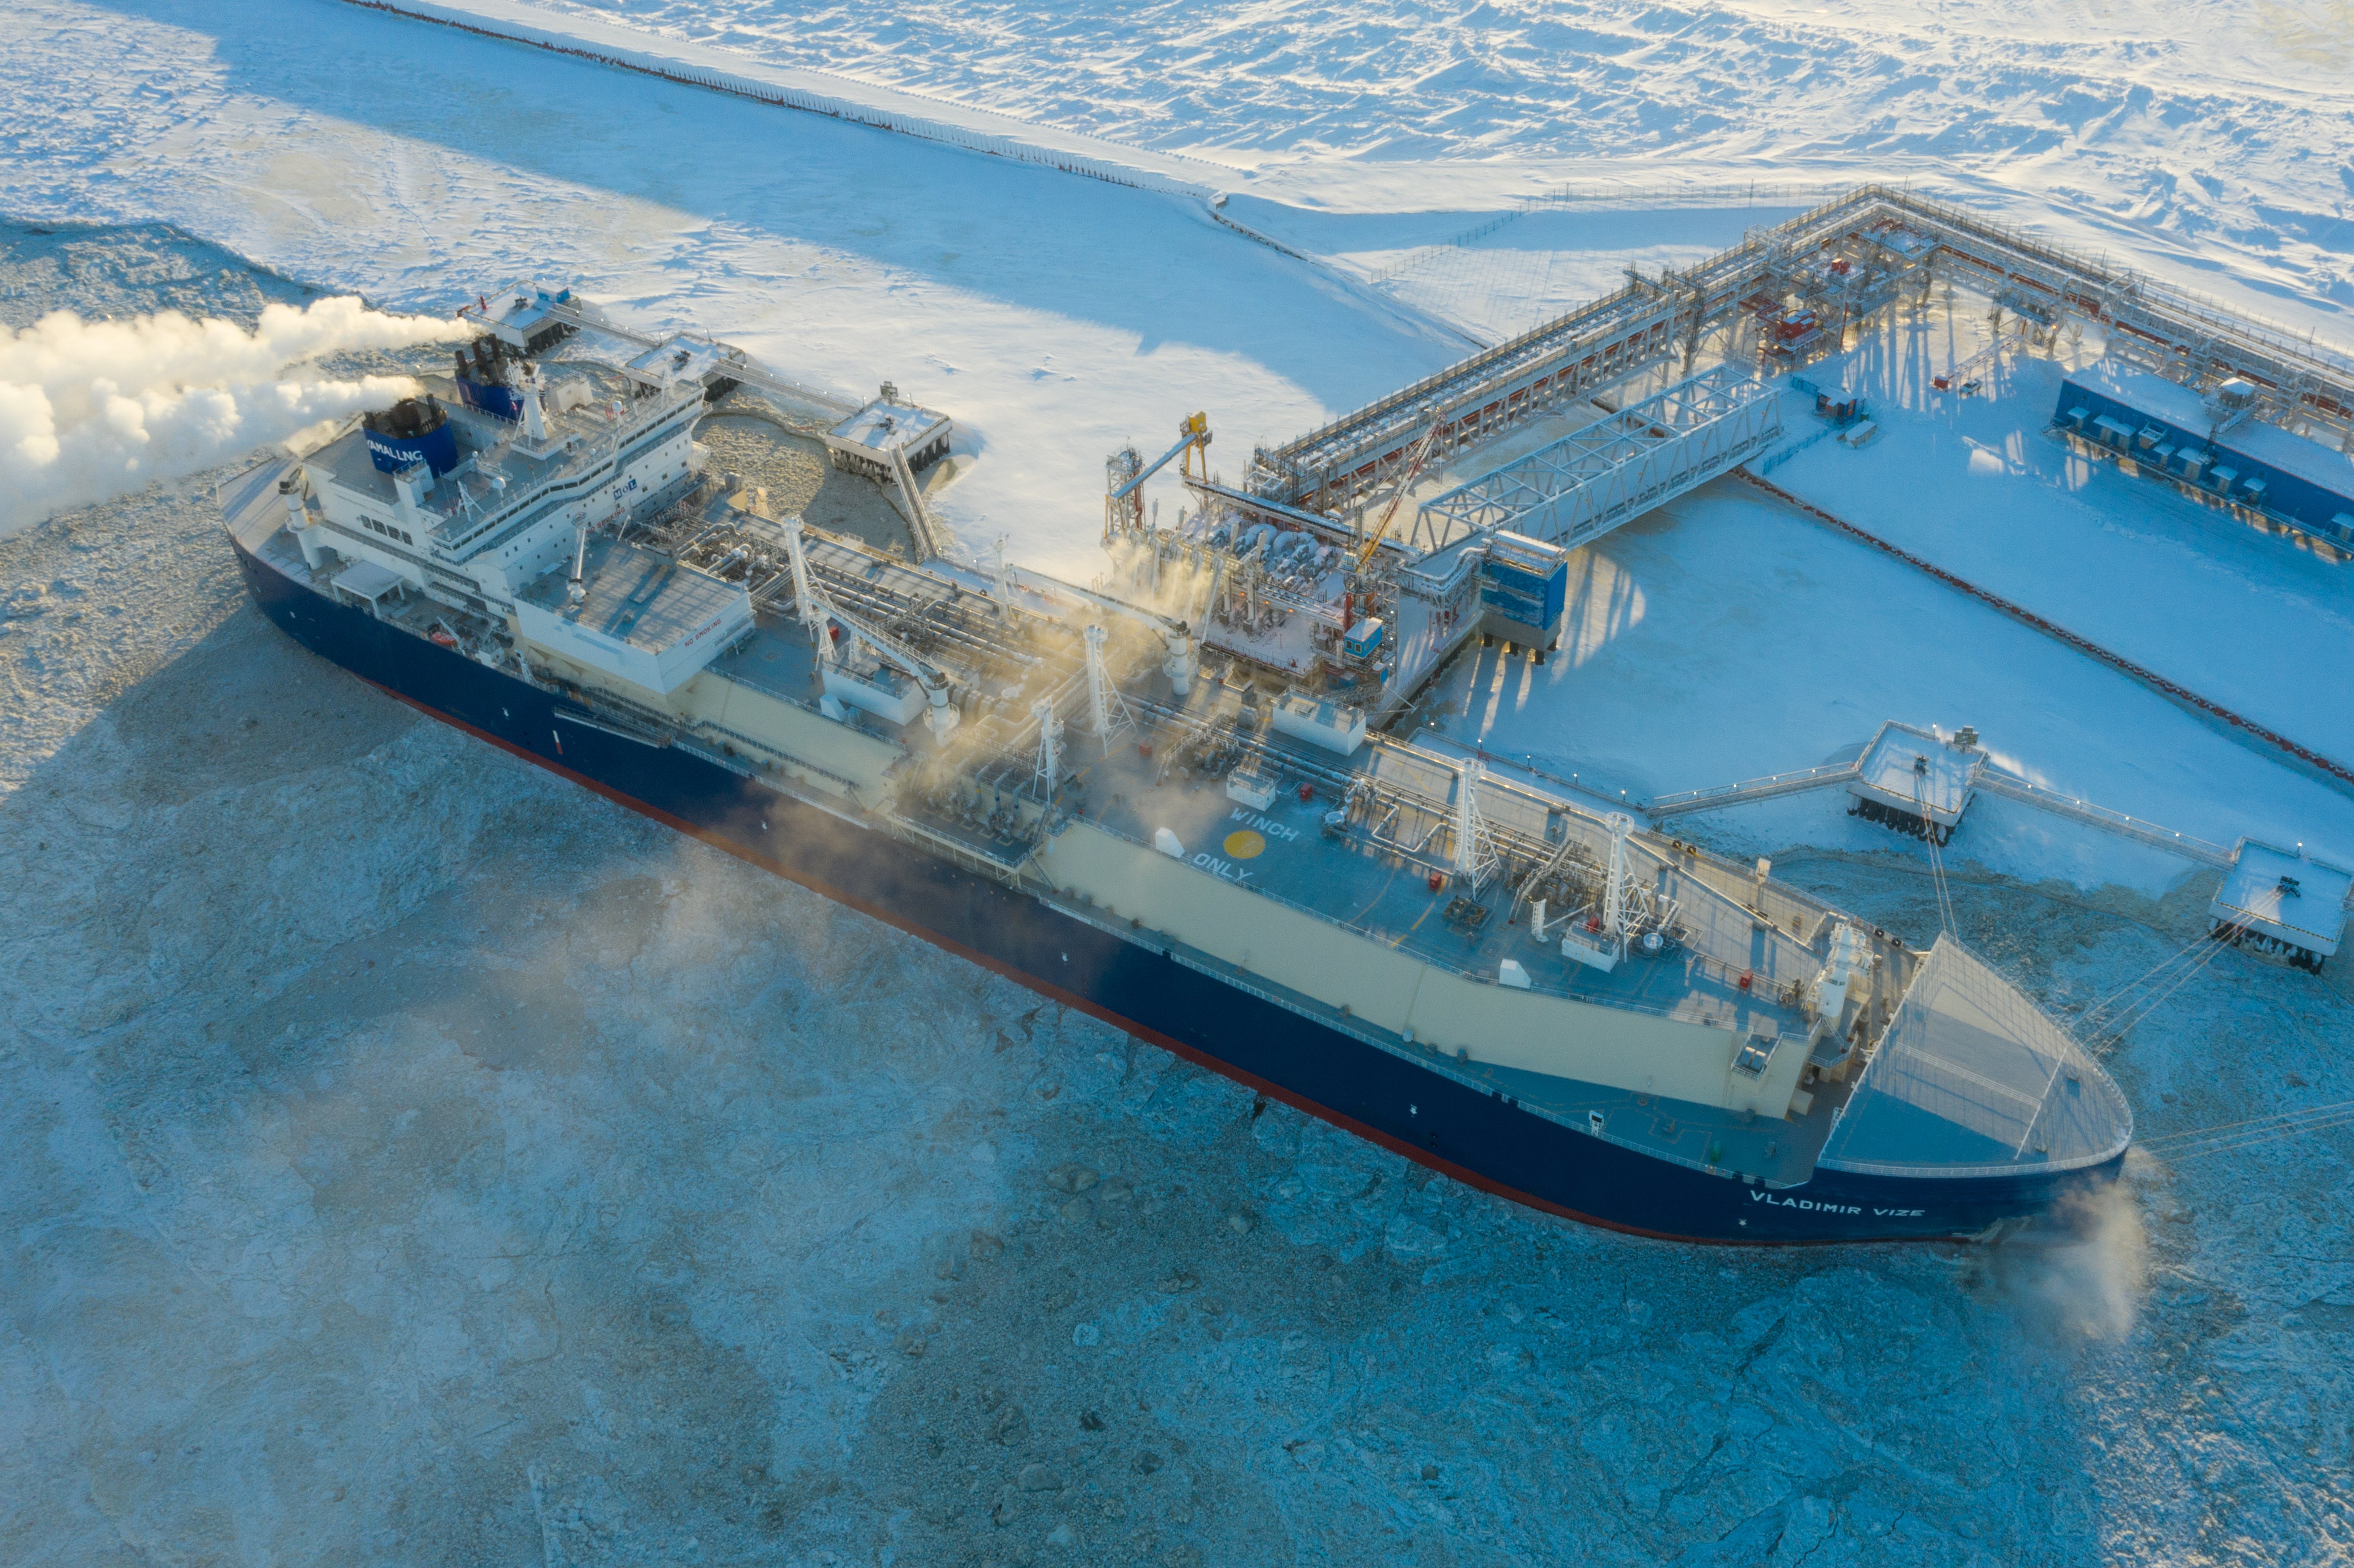 The Vladimir Vize gas carrier is loaded with liquefied natural gas in Sabetta